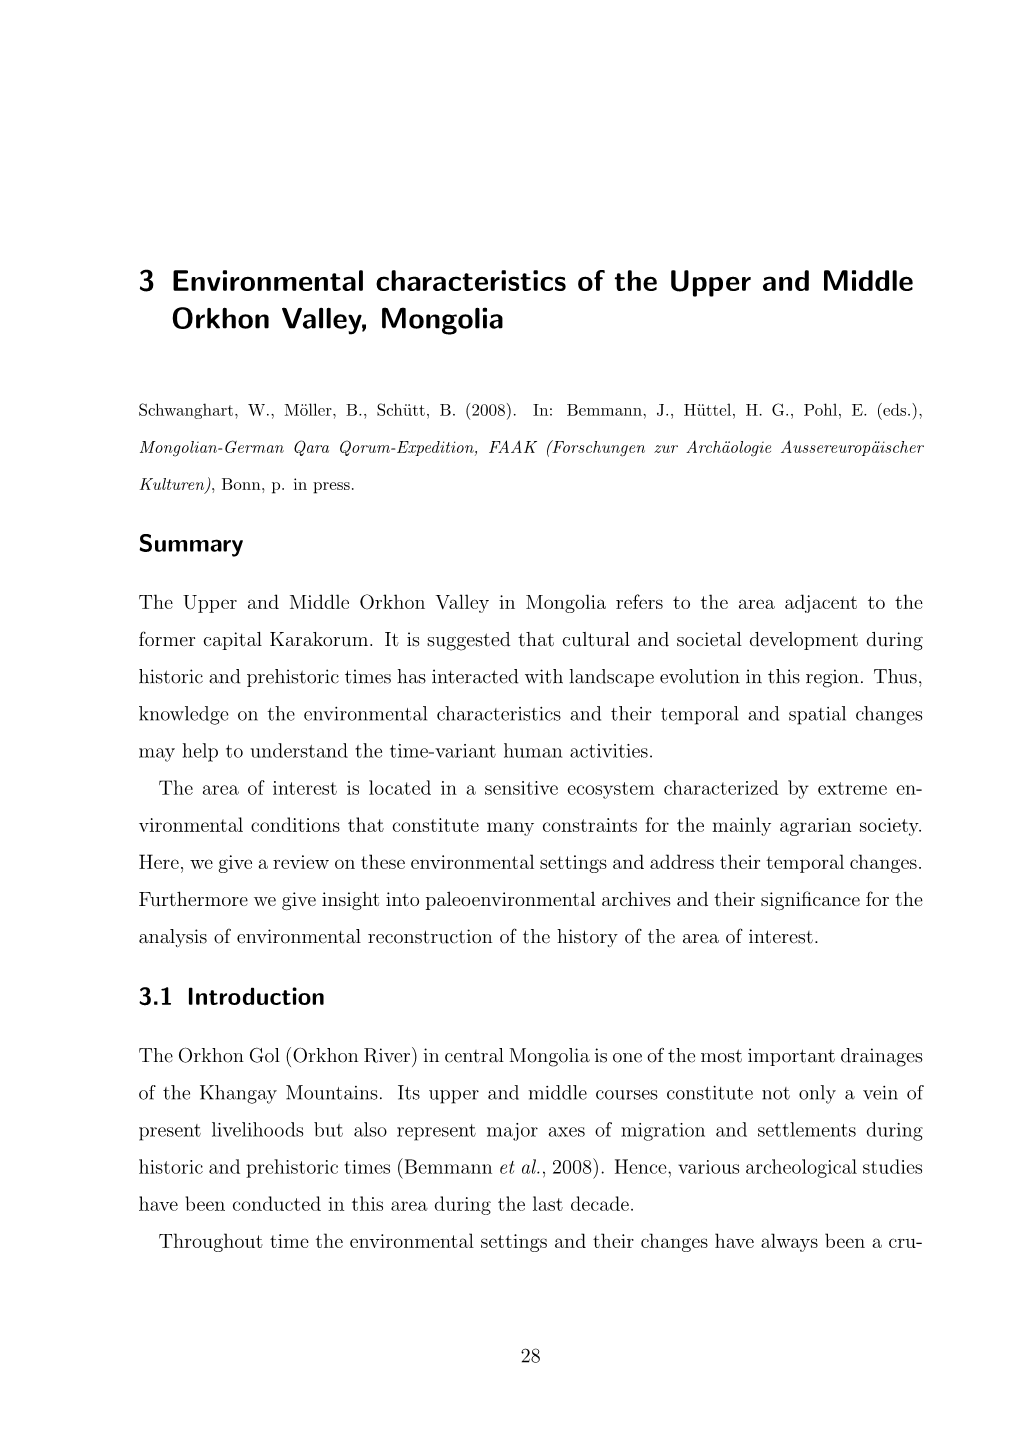 3 Environmental Characteristics of the Upper and Middle Orkhon Valley, Mongolia